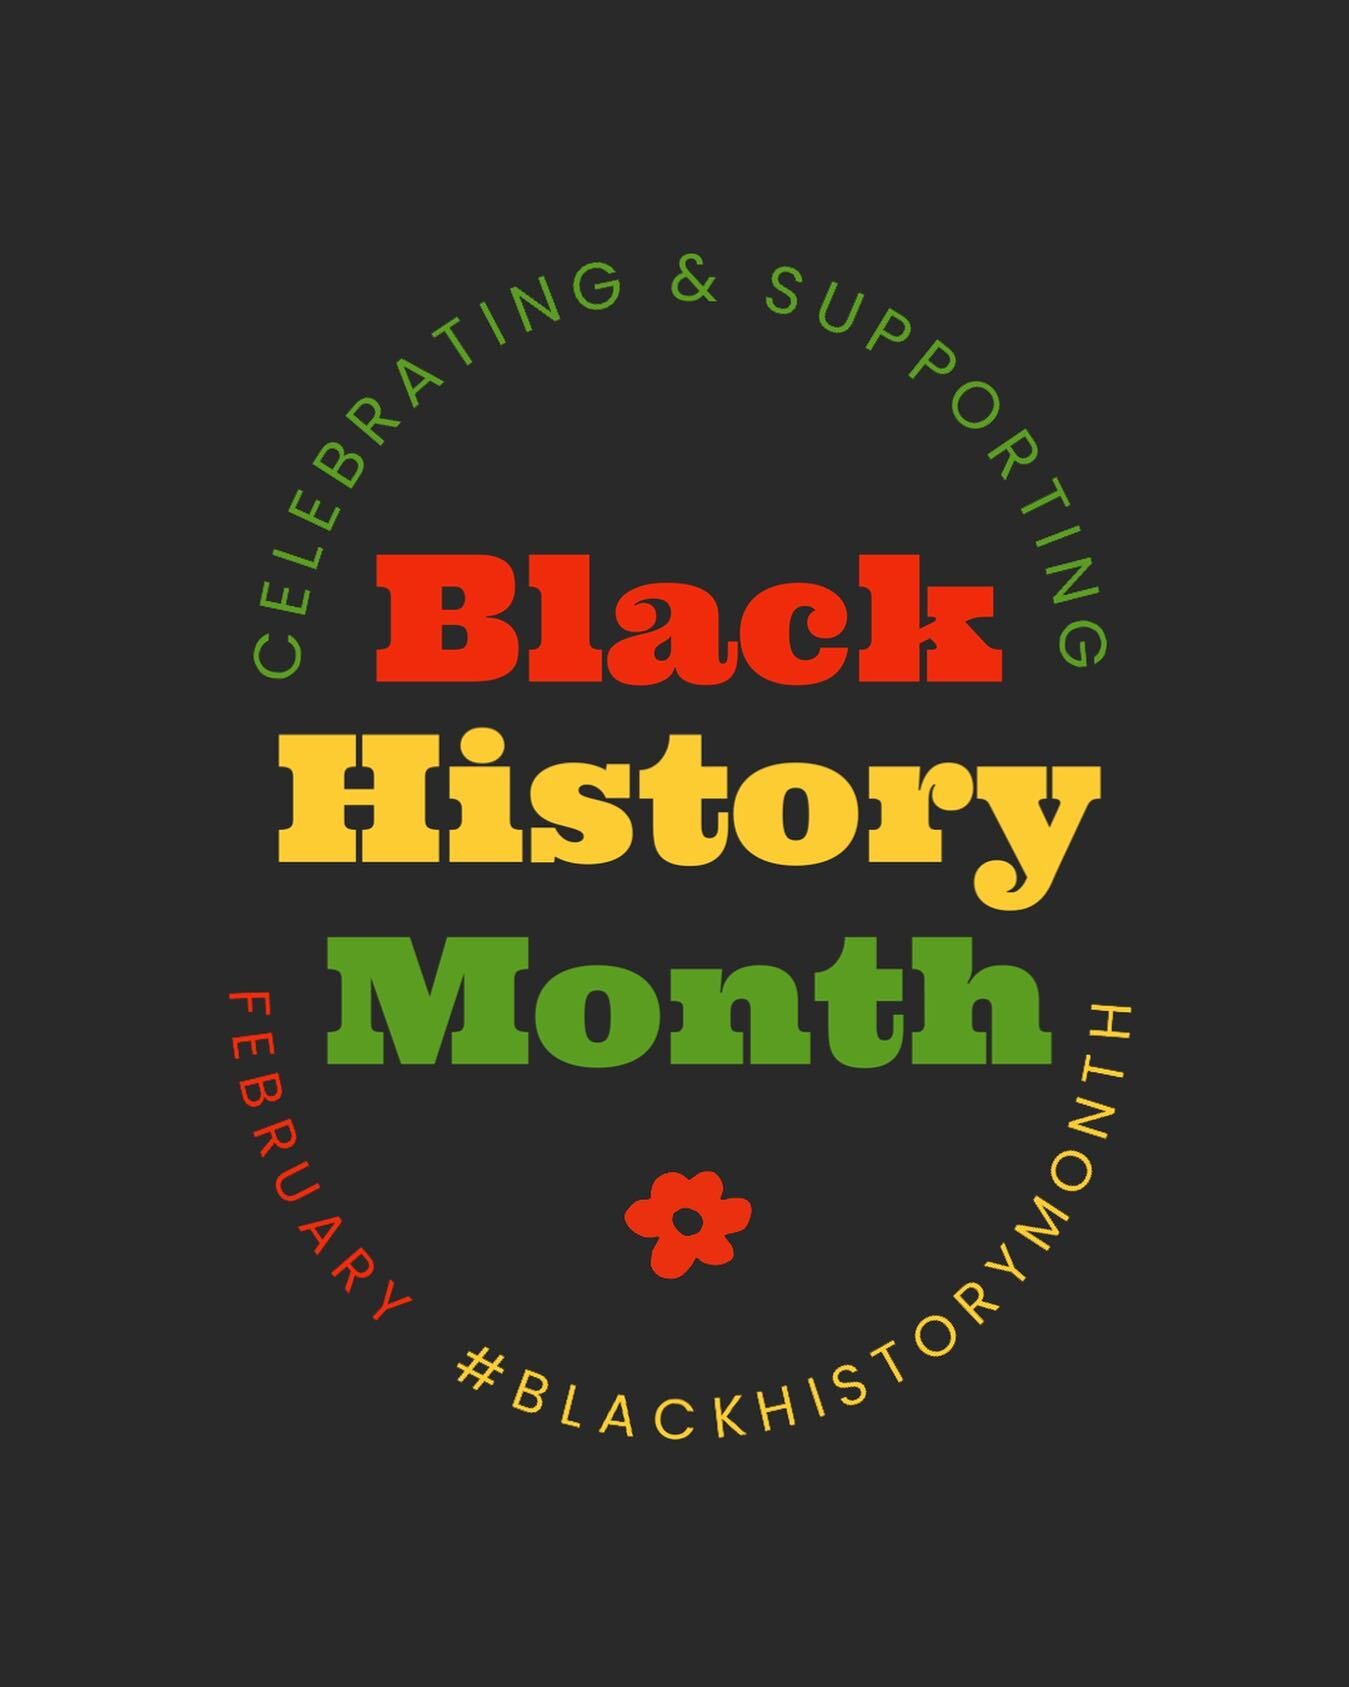 As we celebrate Black History Month, our PAD chapter here at Temple wants to share with you resources for our pre law students to get involved and learn about diversity:

- connect with members of leadership to learn about how our chapter embraces di